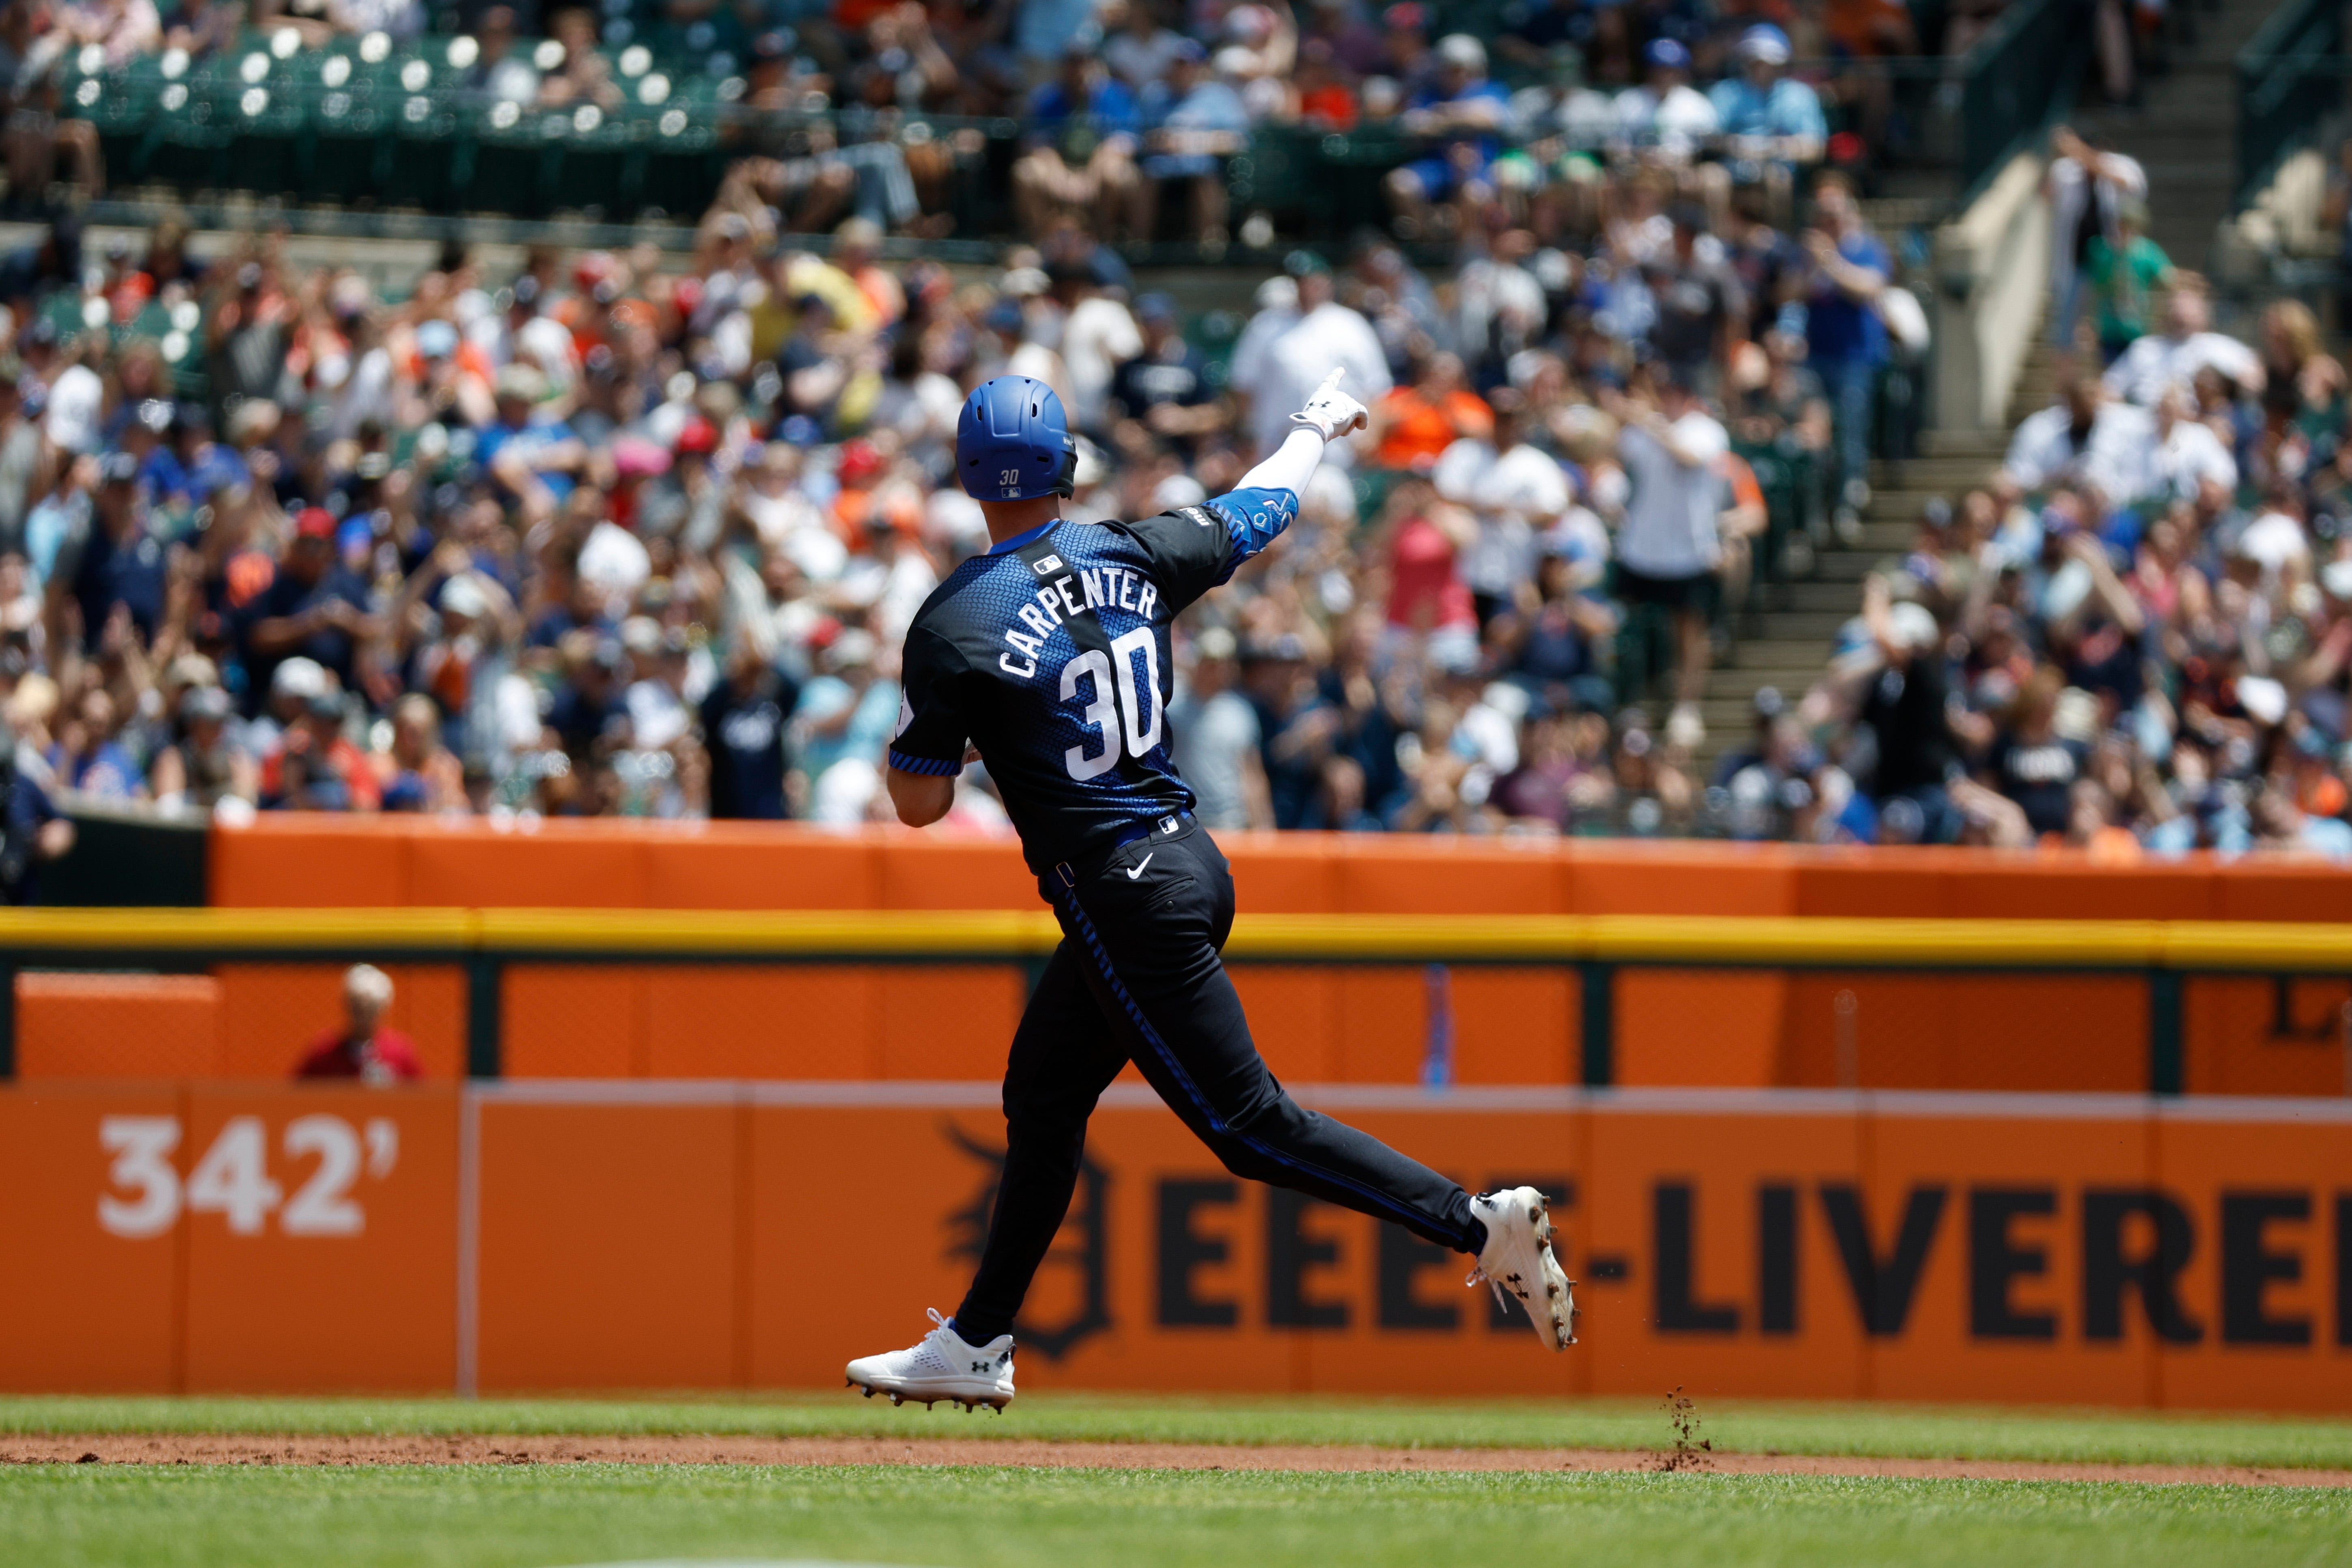 Detroit Tigers' Kerry Carpenter placed on injured list with lumbar spine inflammation